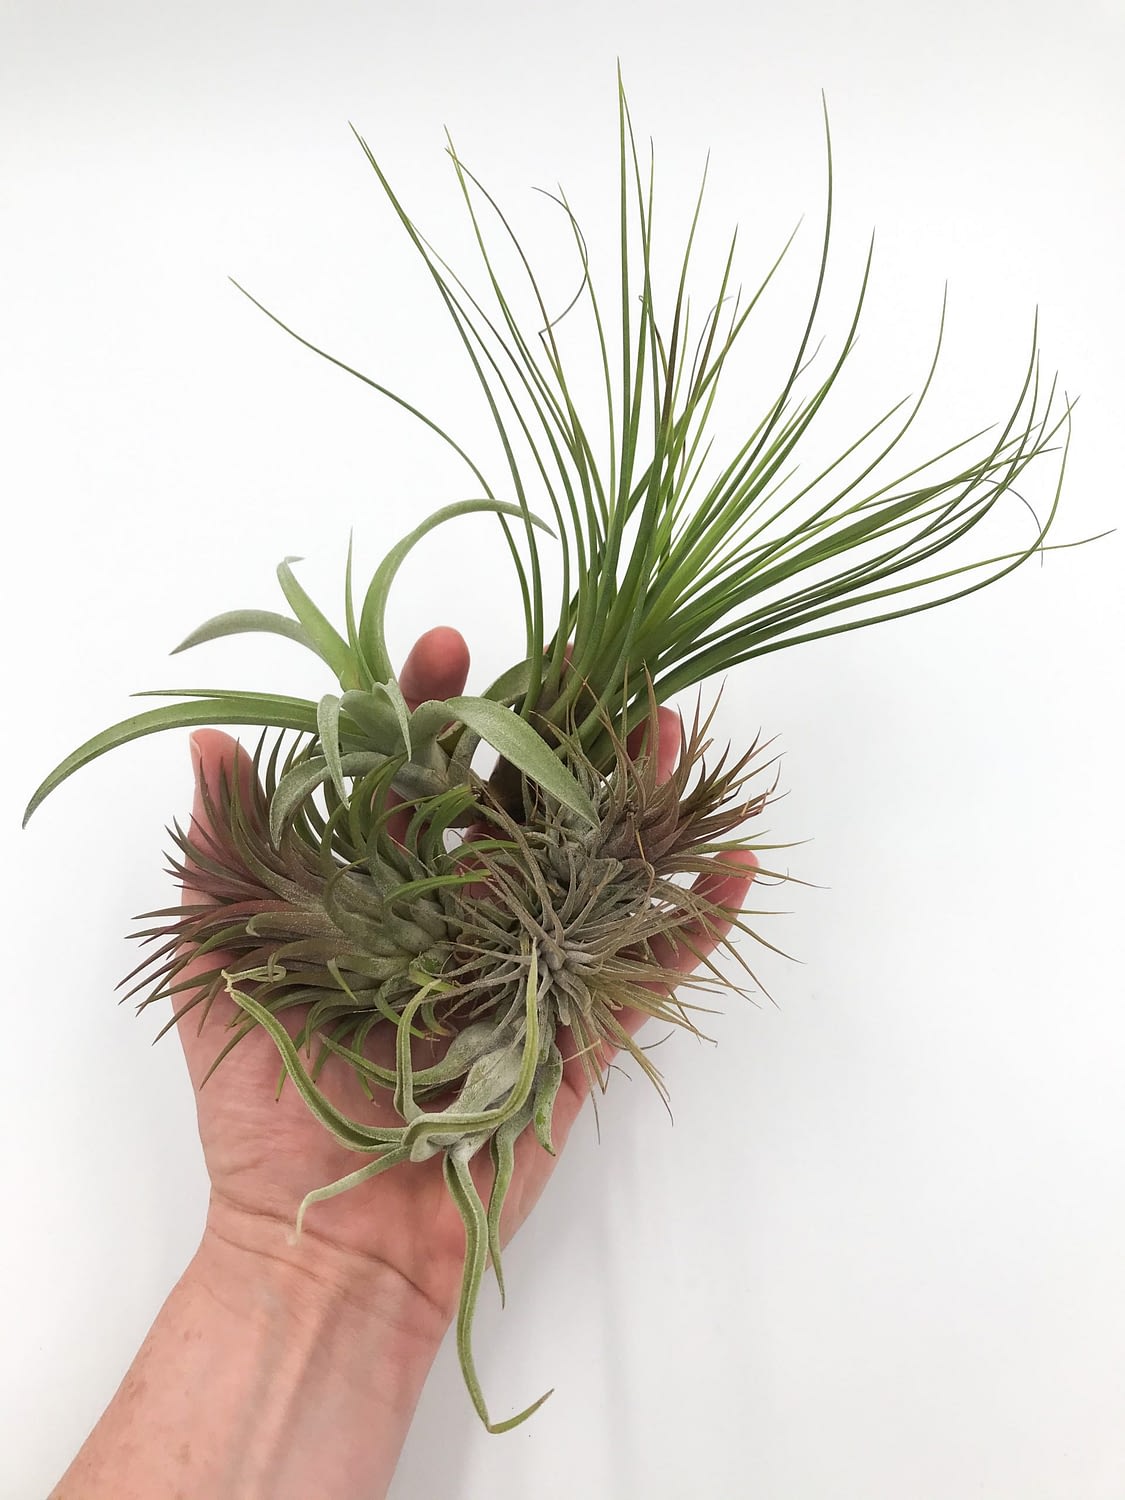 Selection of small and long air plants